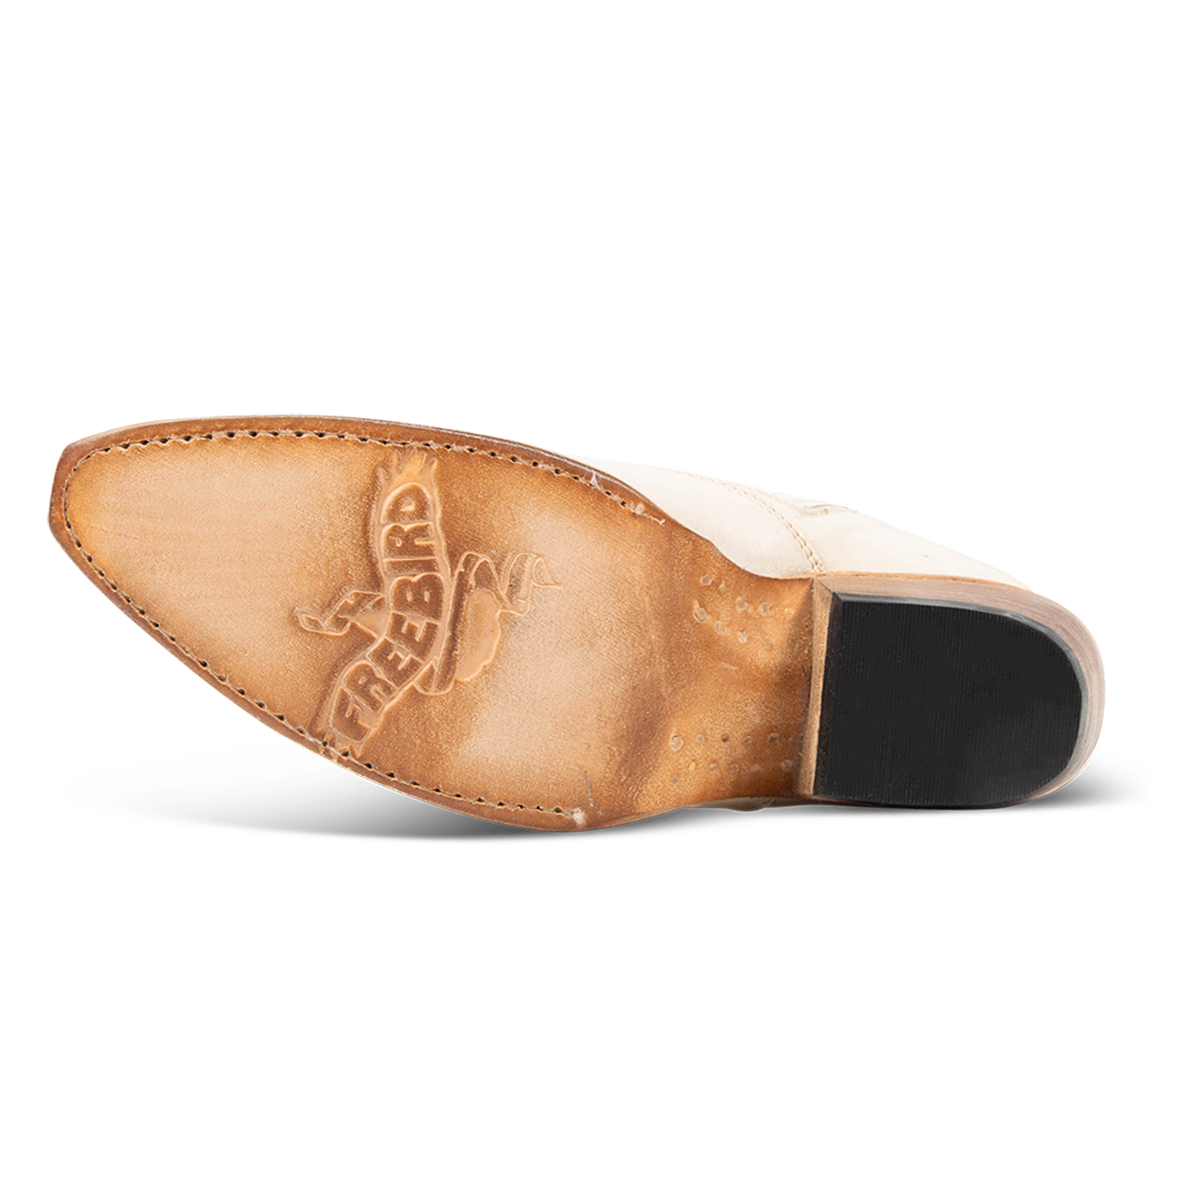 Leather sole imprinted with FREEBIRD on women's Wentworth beige western mule